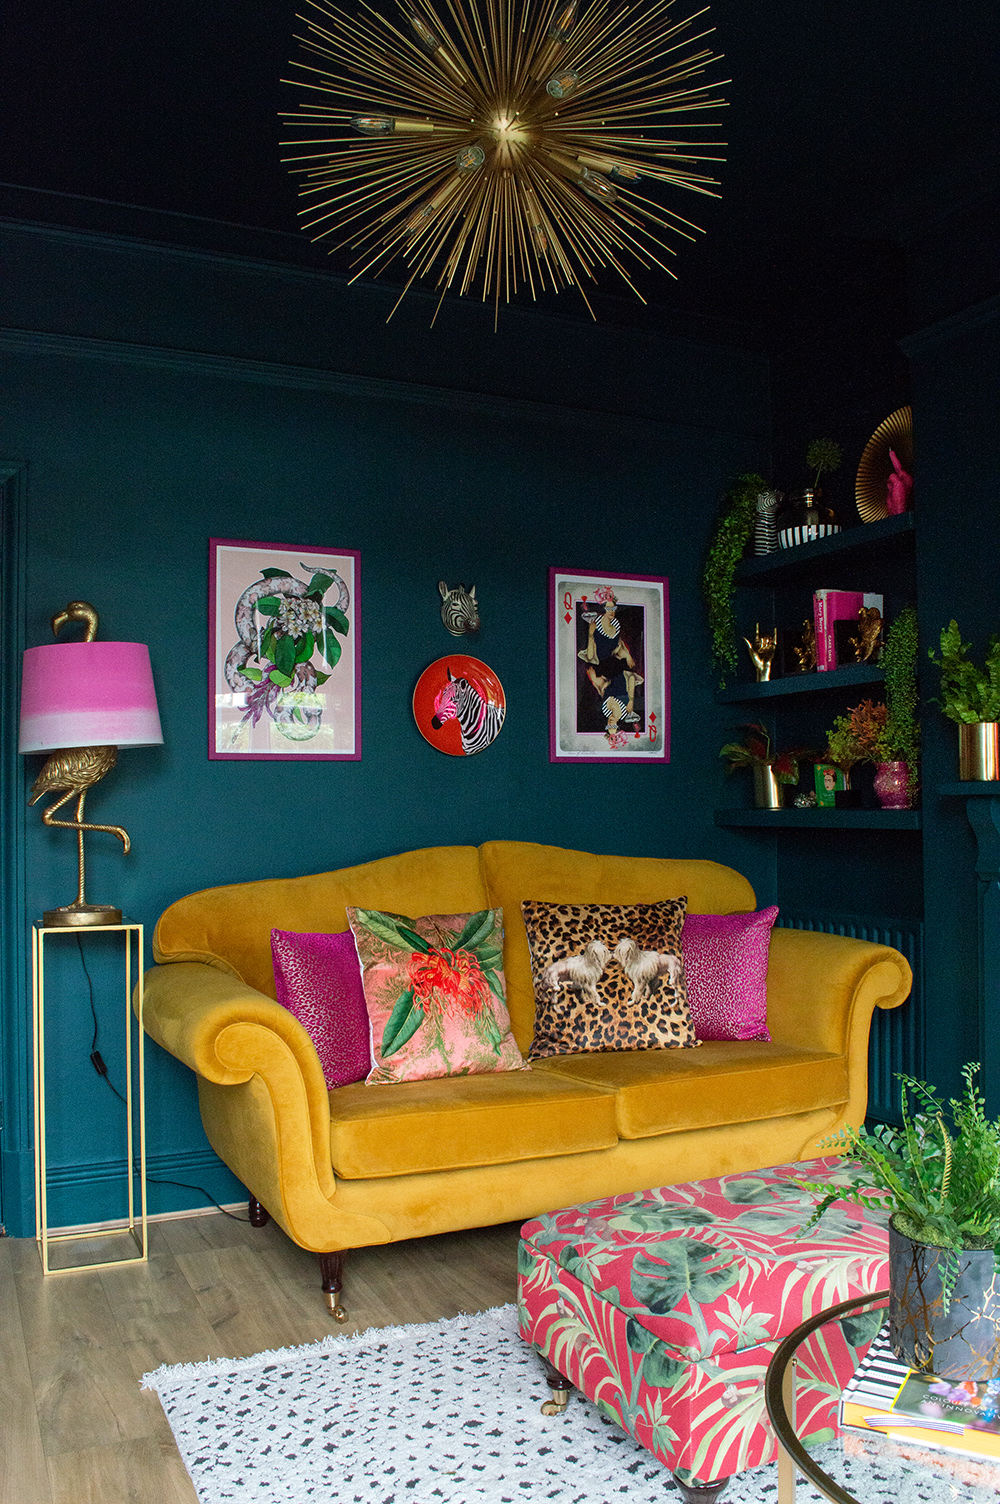 Dark and moody living room decor with mustard yellow velvet sofa and colourful cushions. featuring lots of quirky home accessories by Audenza